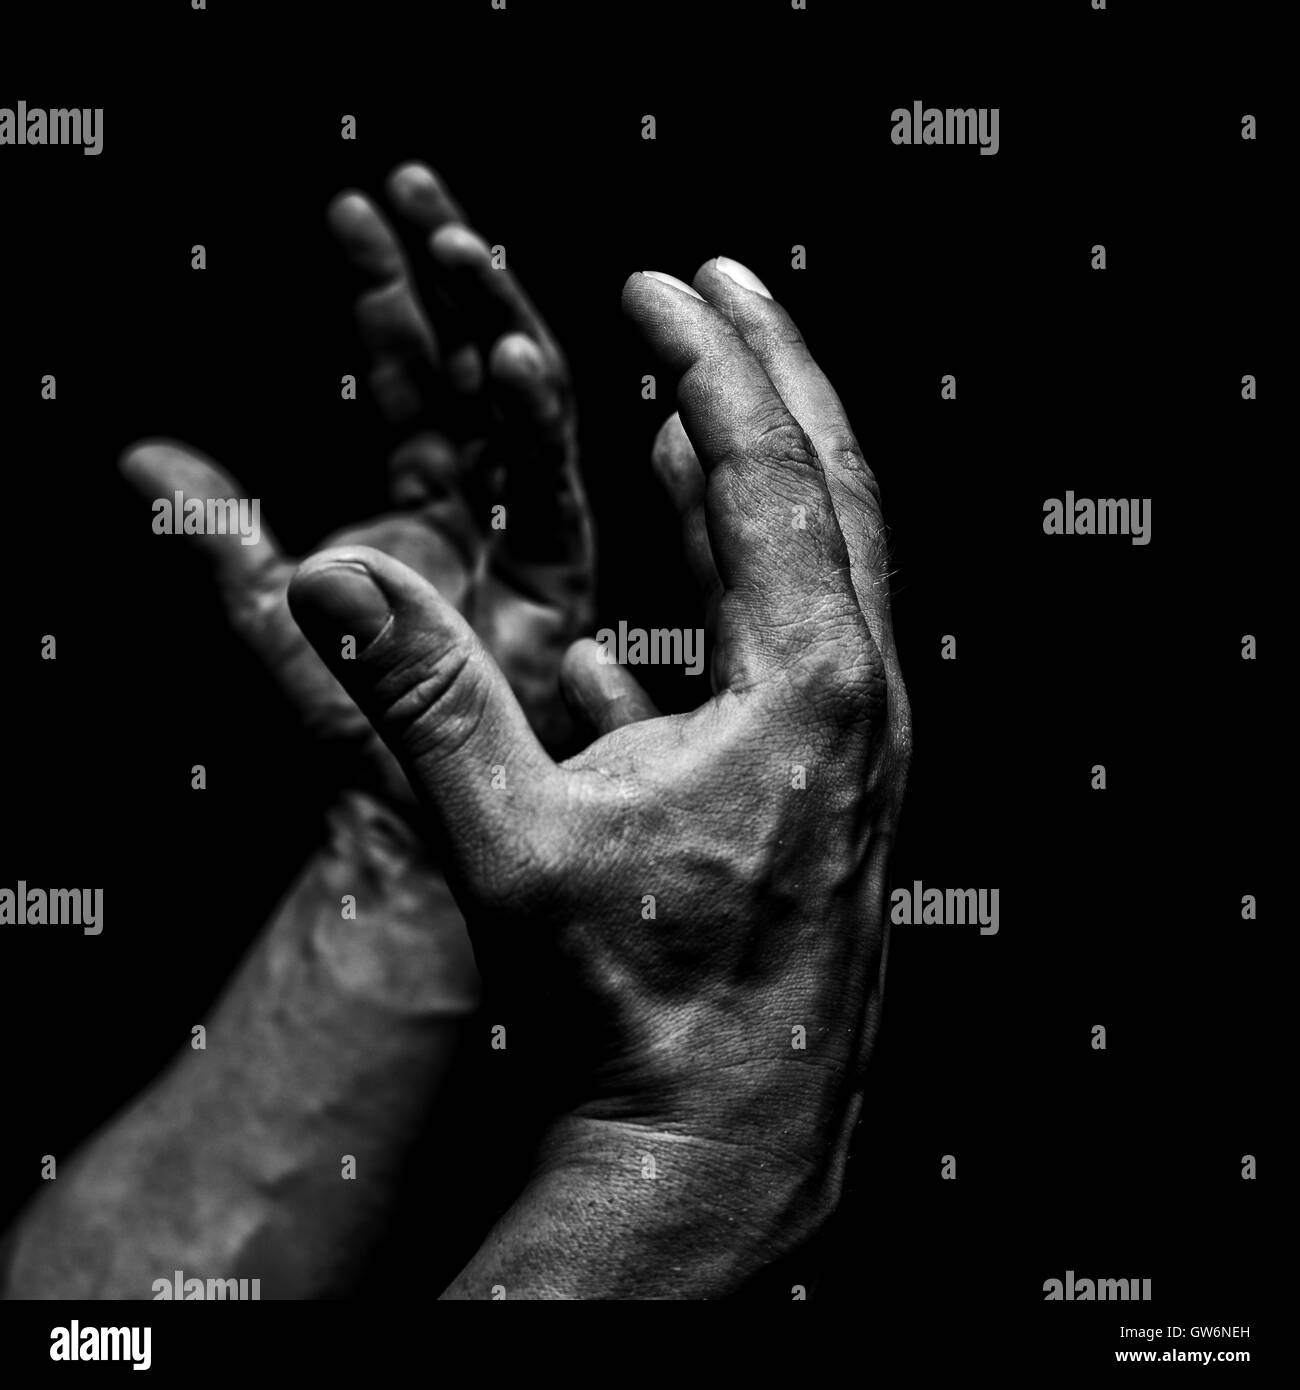 Men's hands on a black background Stock Photo